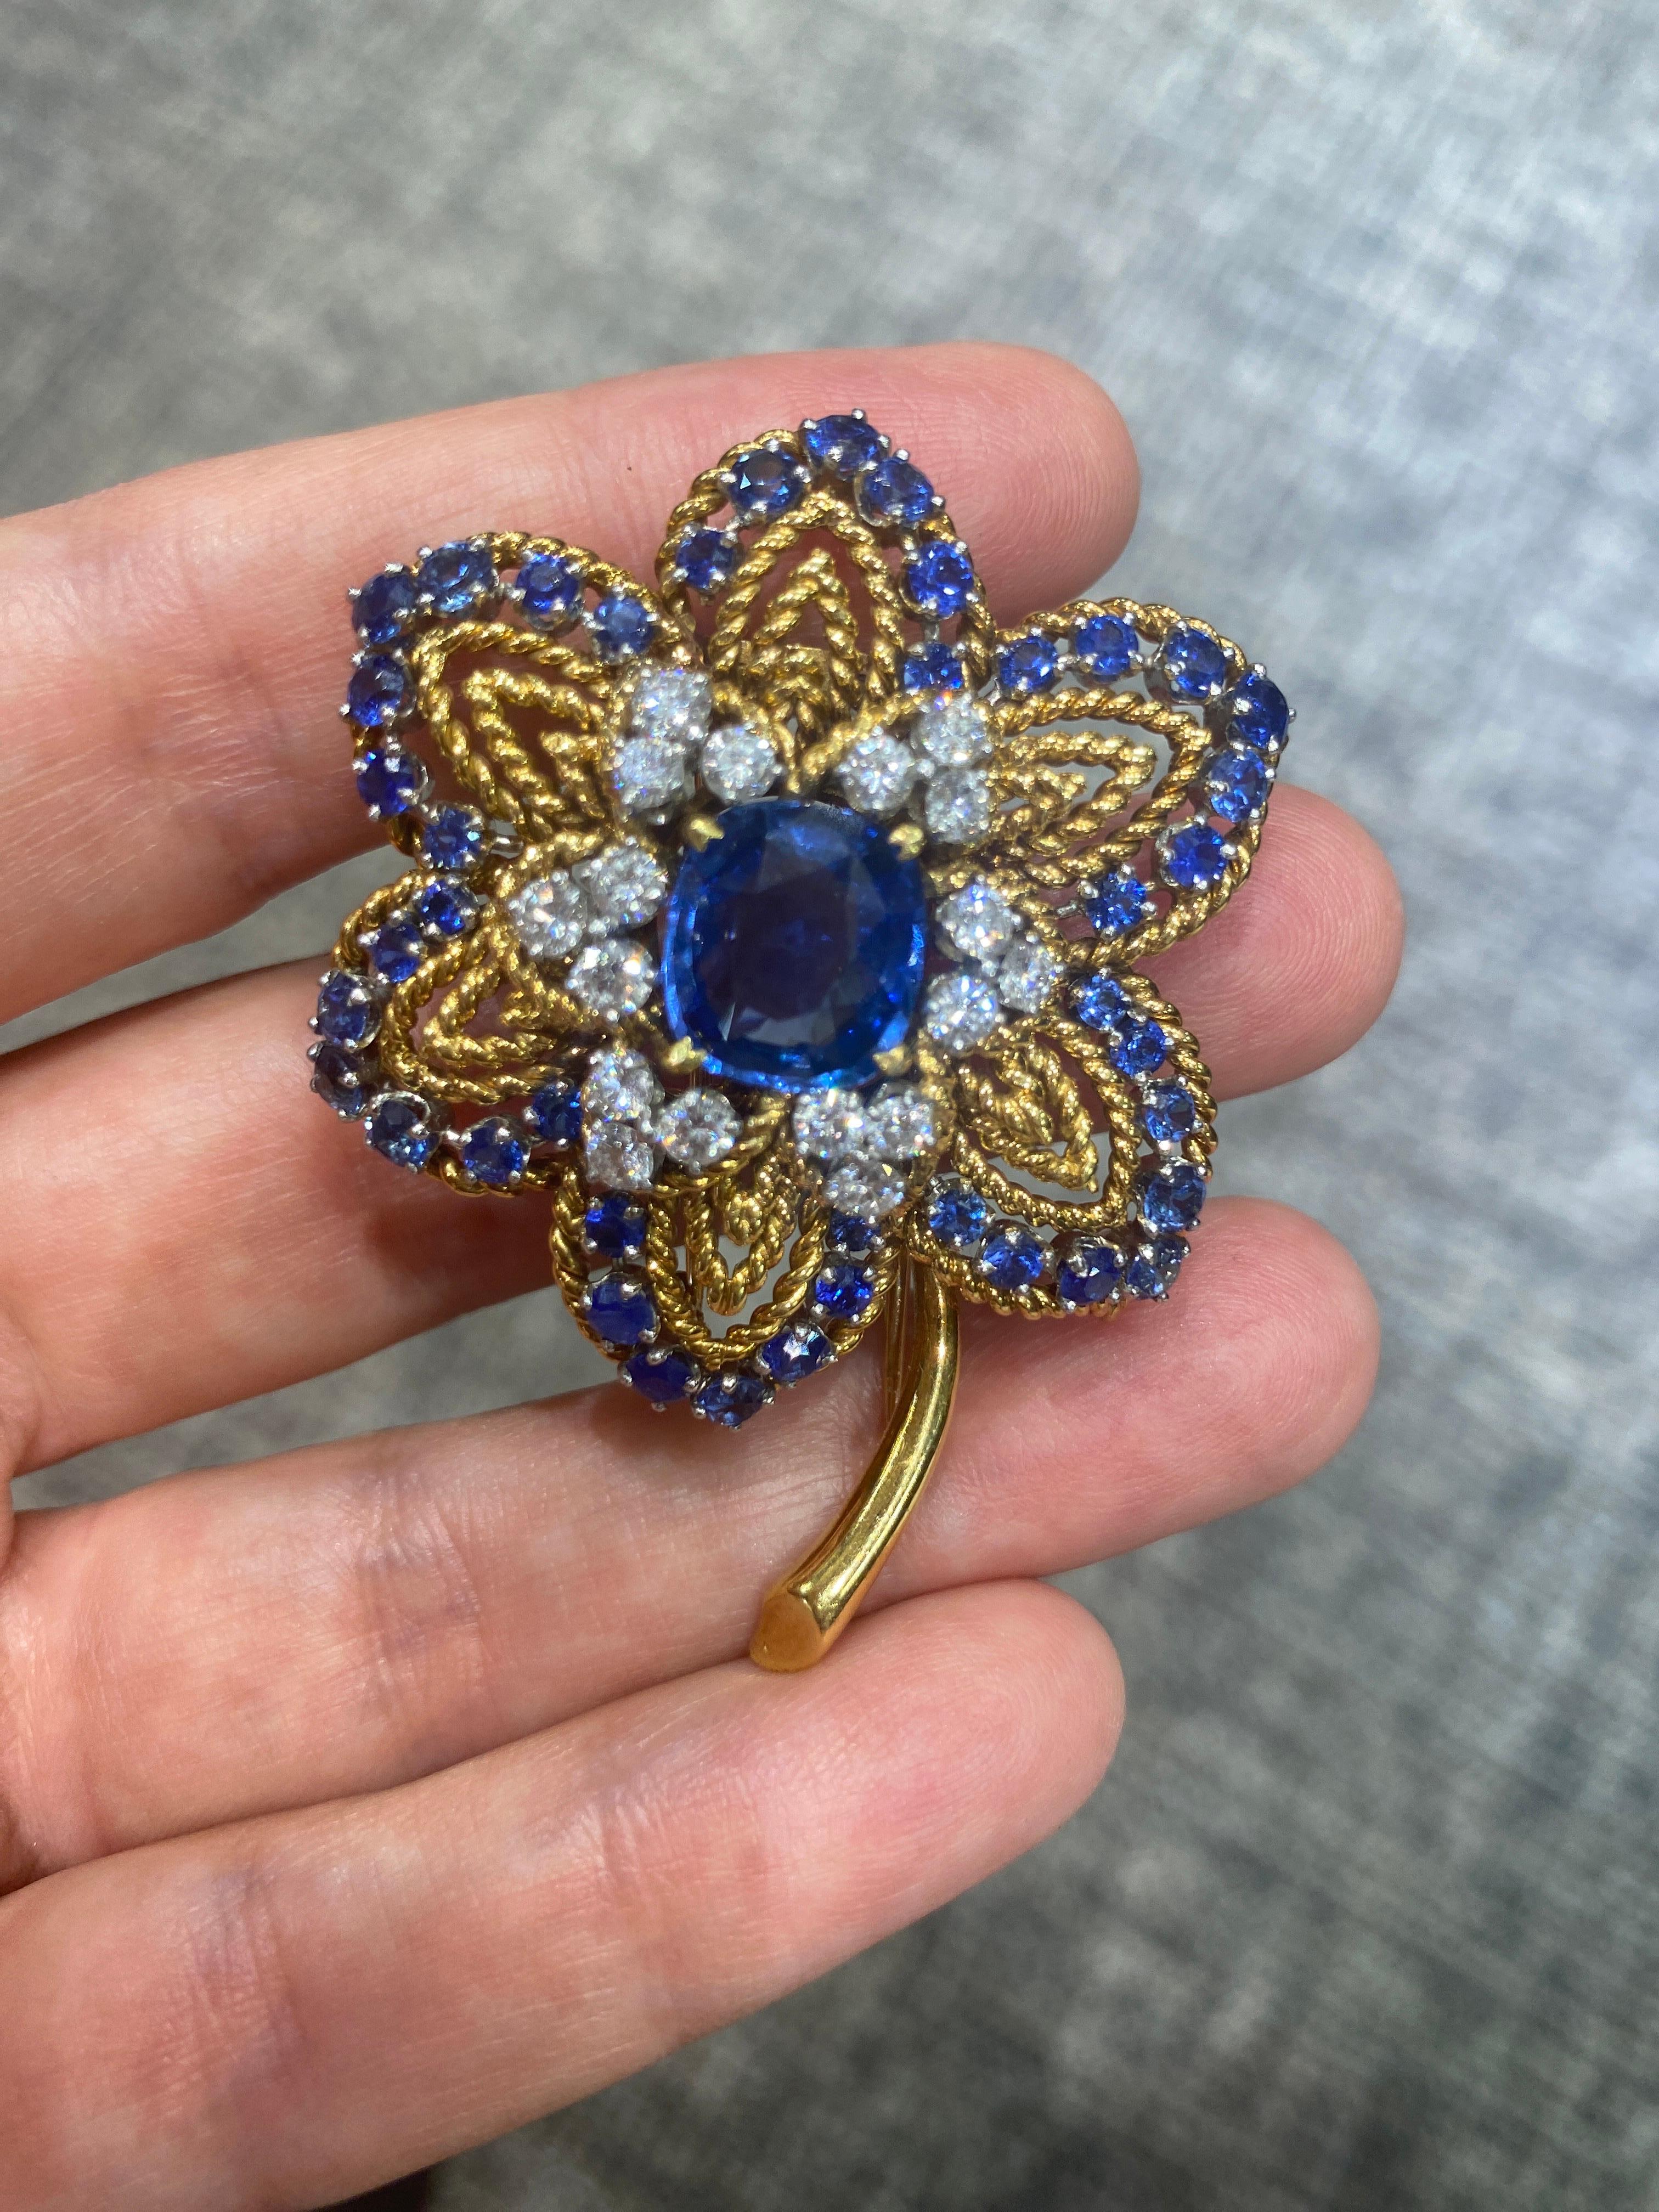 The design of this outstanding Van Cleef & Arpels 18 carat gold brooch from the 1960s centres around a 5.66 carat Ceylon sapphire. The centre stone is adorned with 18 round cut diamonds. The petals of the flower are outlined with round cut